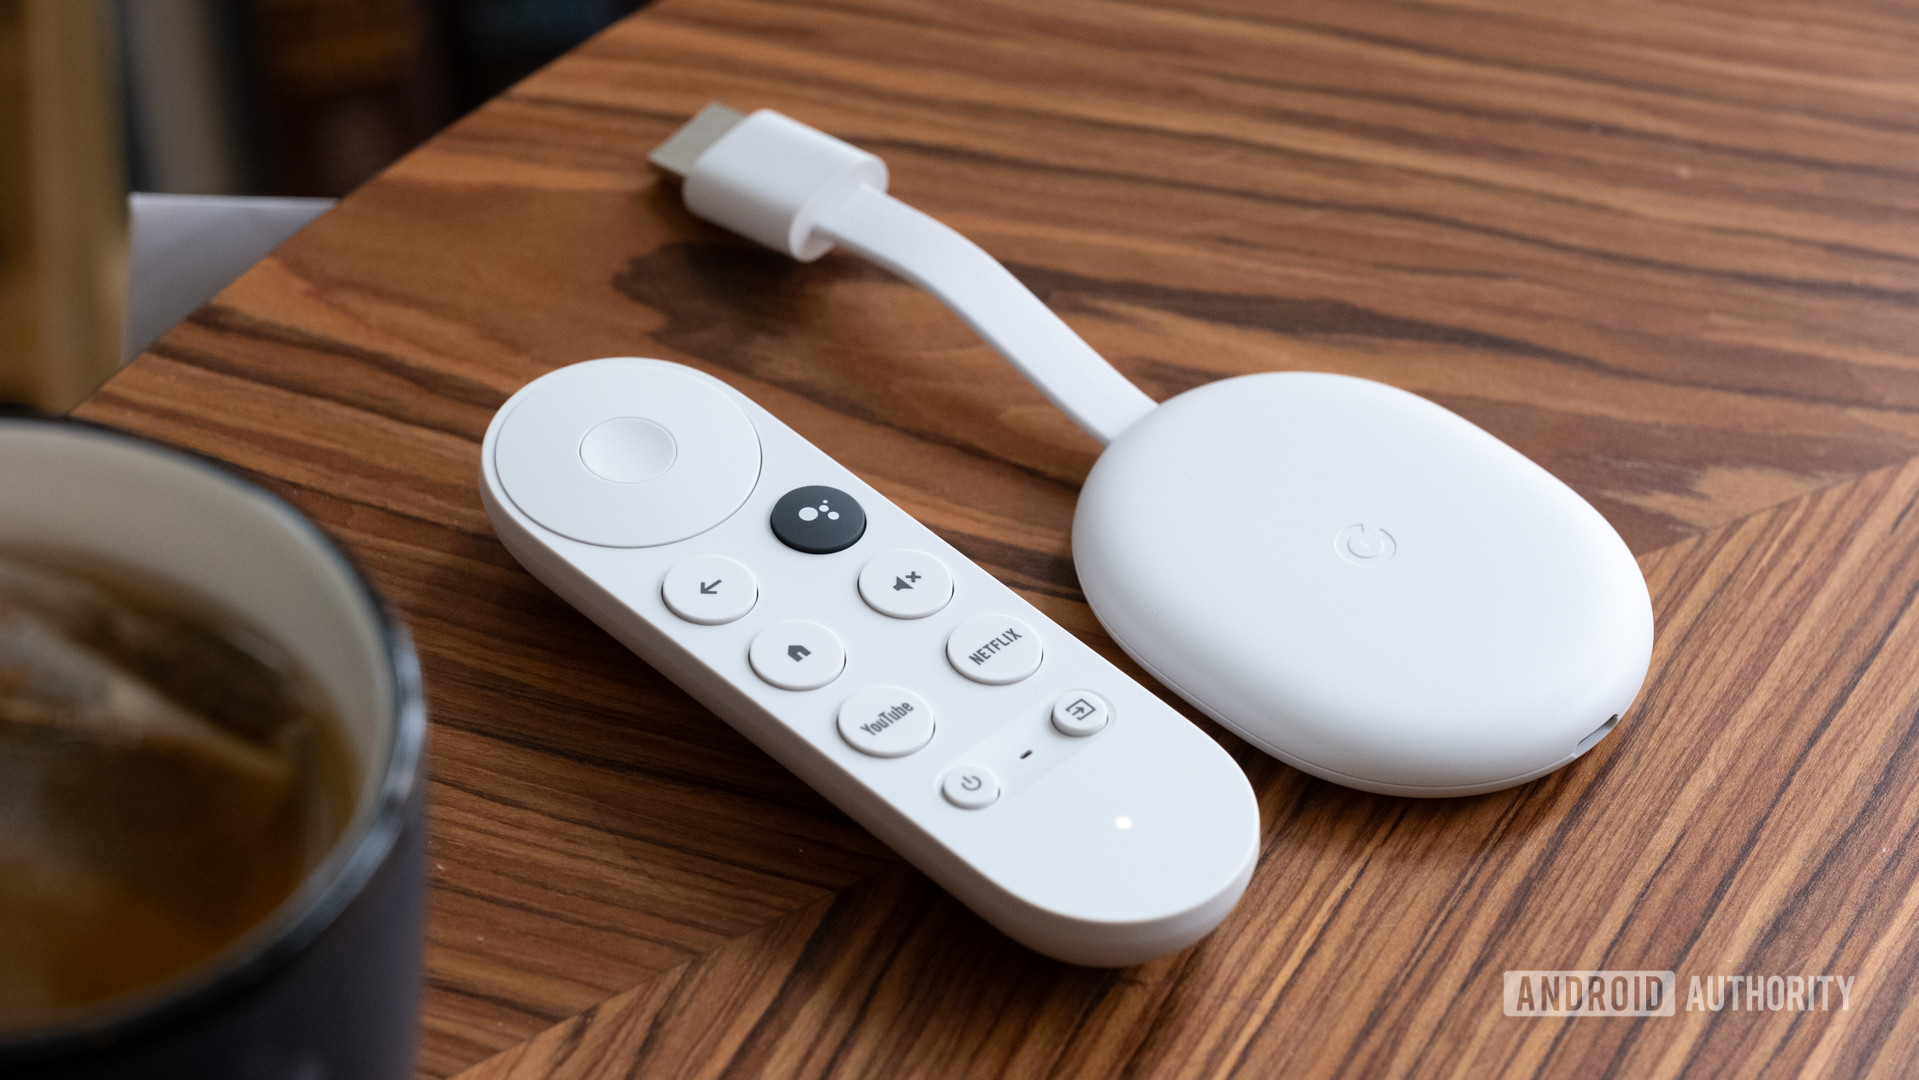 Google TV is apparently getting a ton of new powerful capabilities